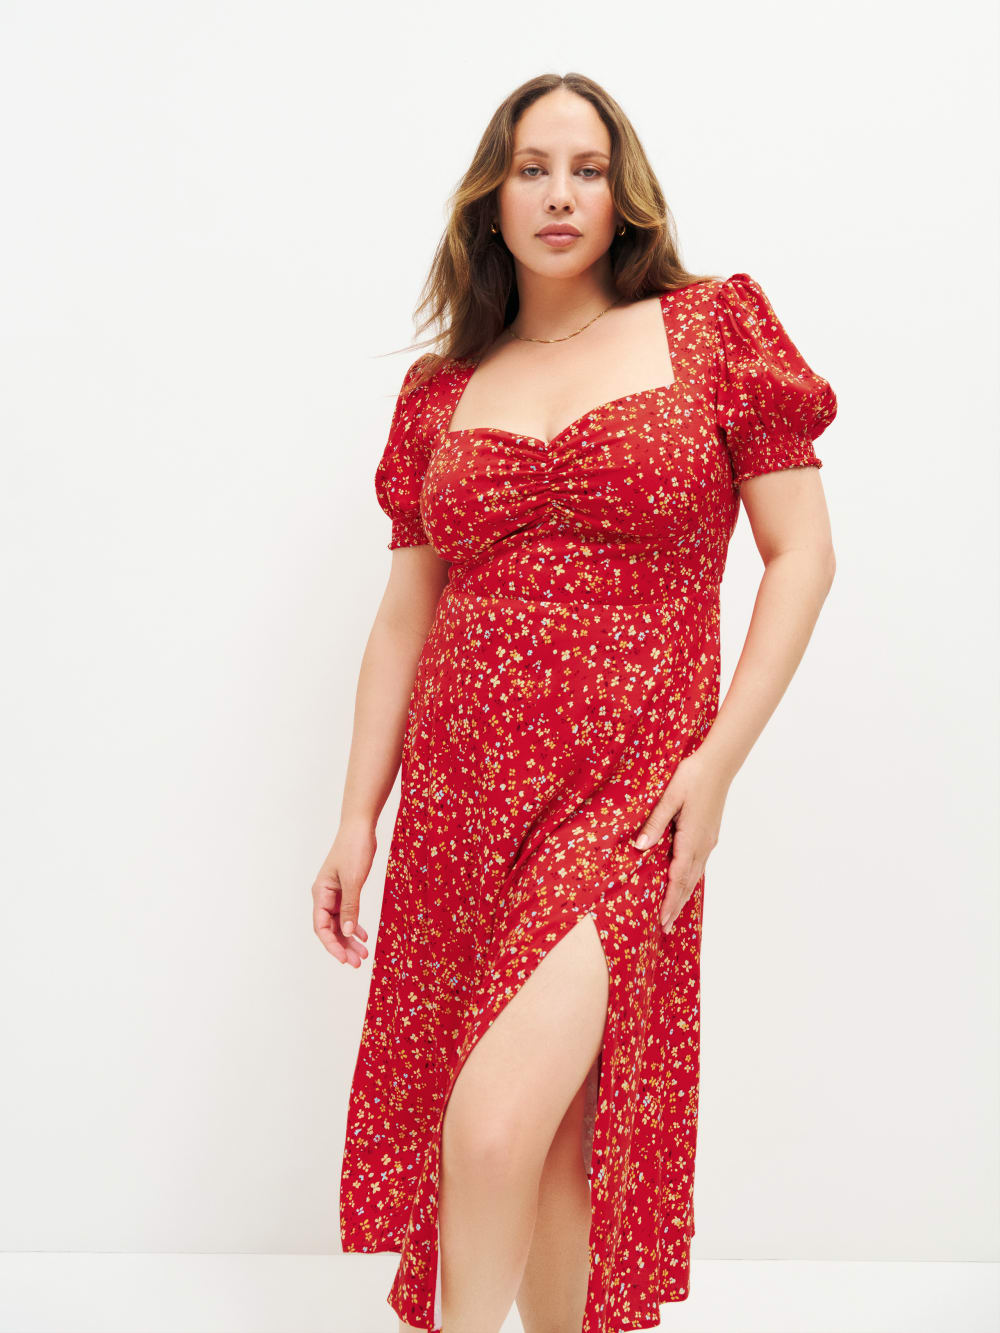 Reformation red floral lacey midi dress. This dress has Back smocking, sweetheart neckline with ruching detail, and side slit with a Back zipper. 